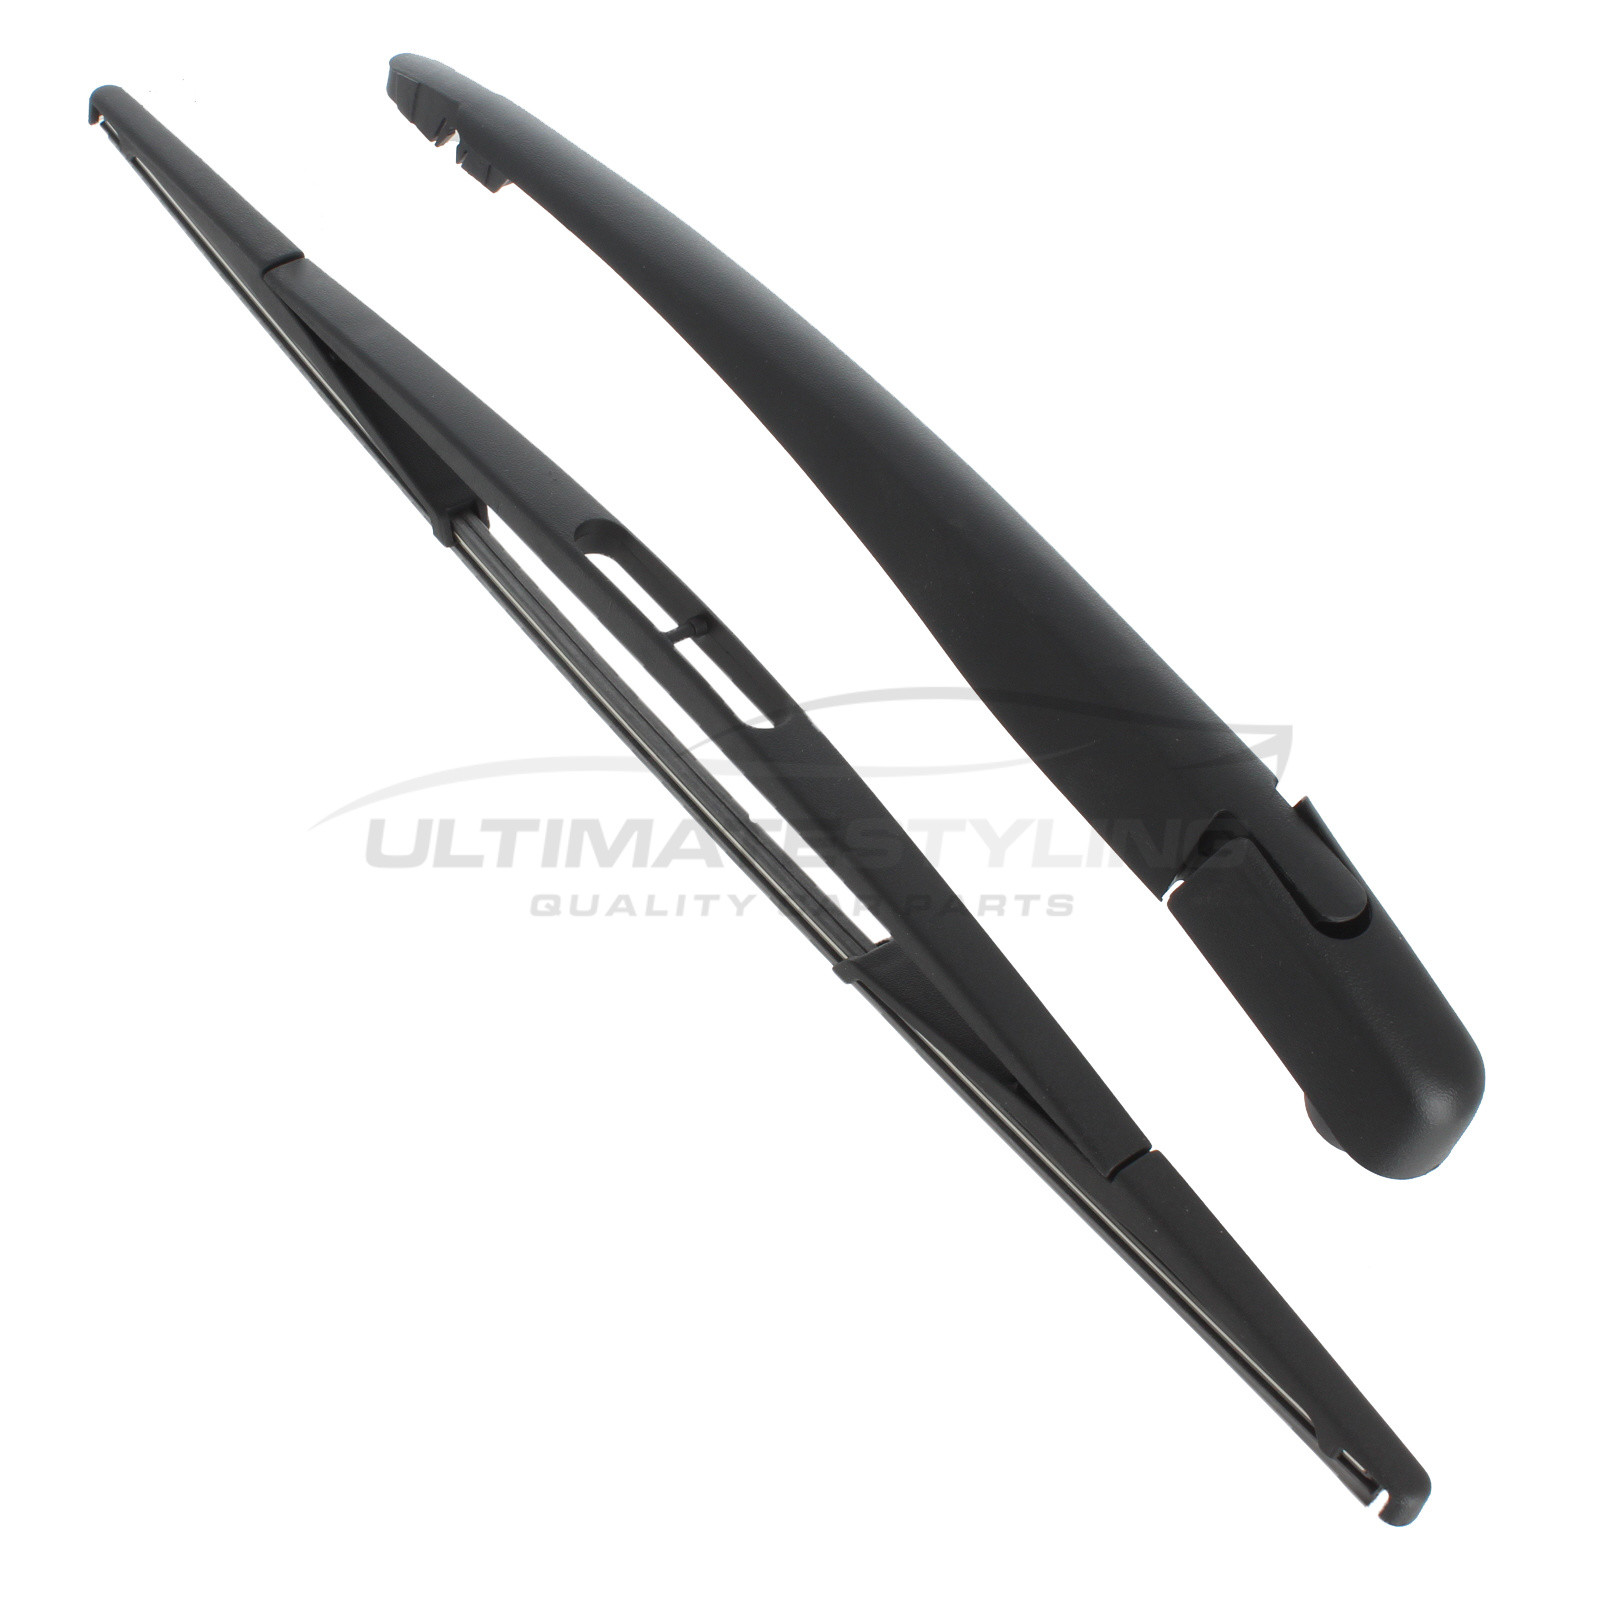 Rear Wiper Arm & Blade Set for Vauxhall Corsa